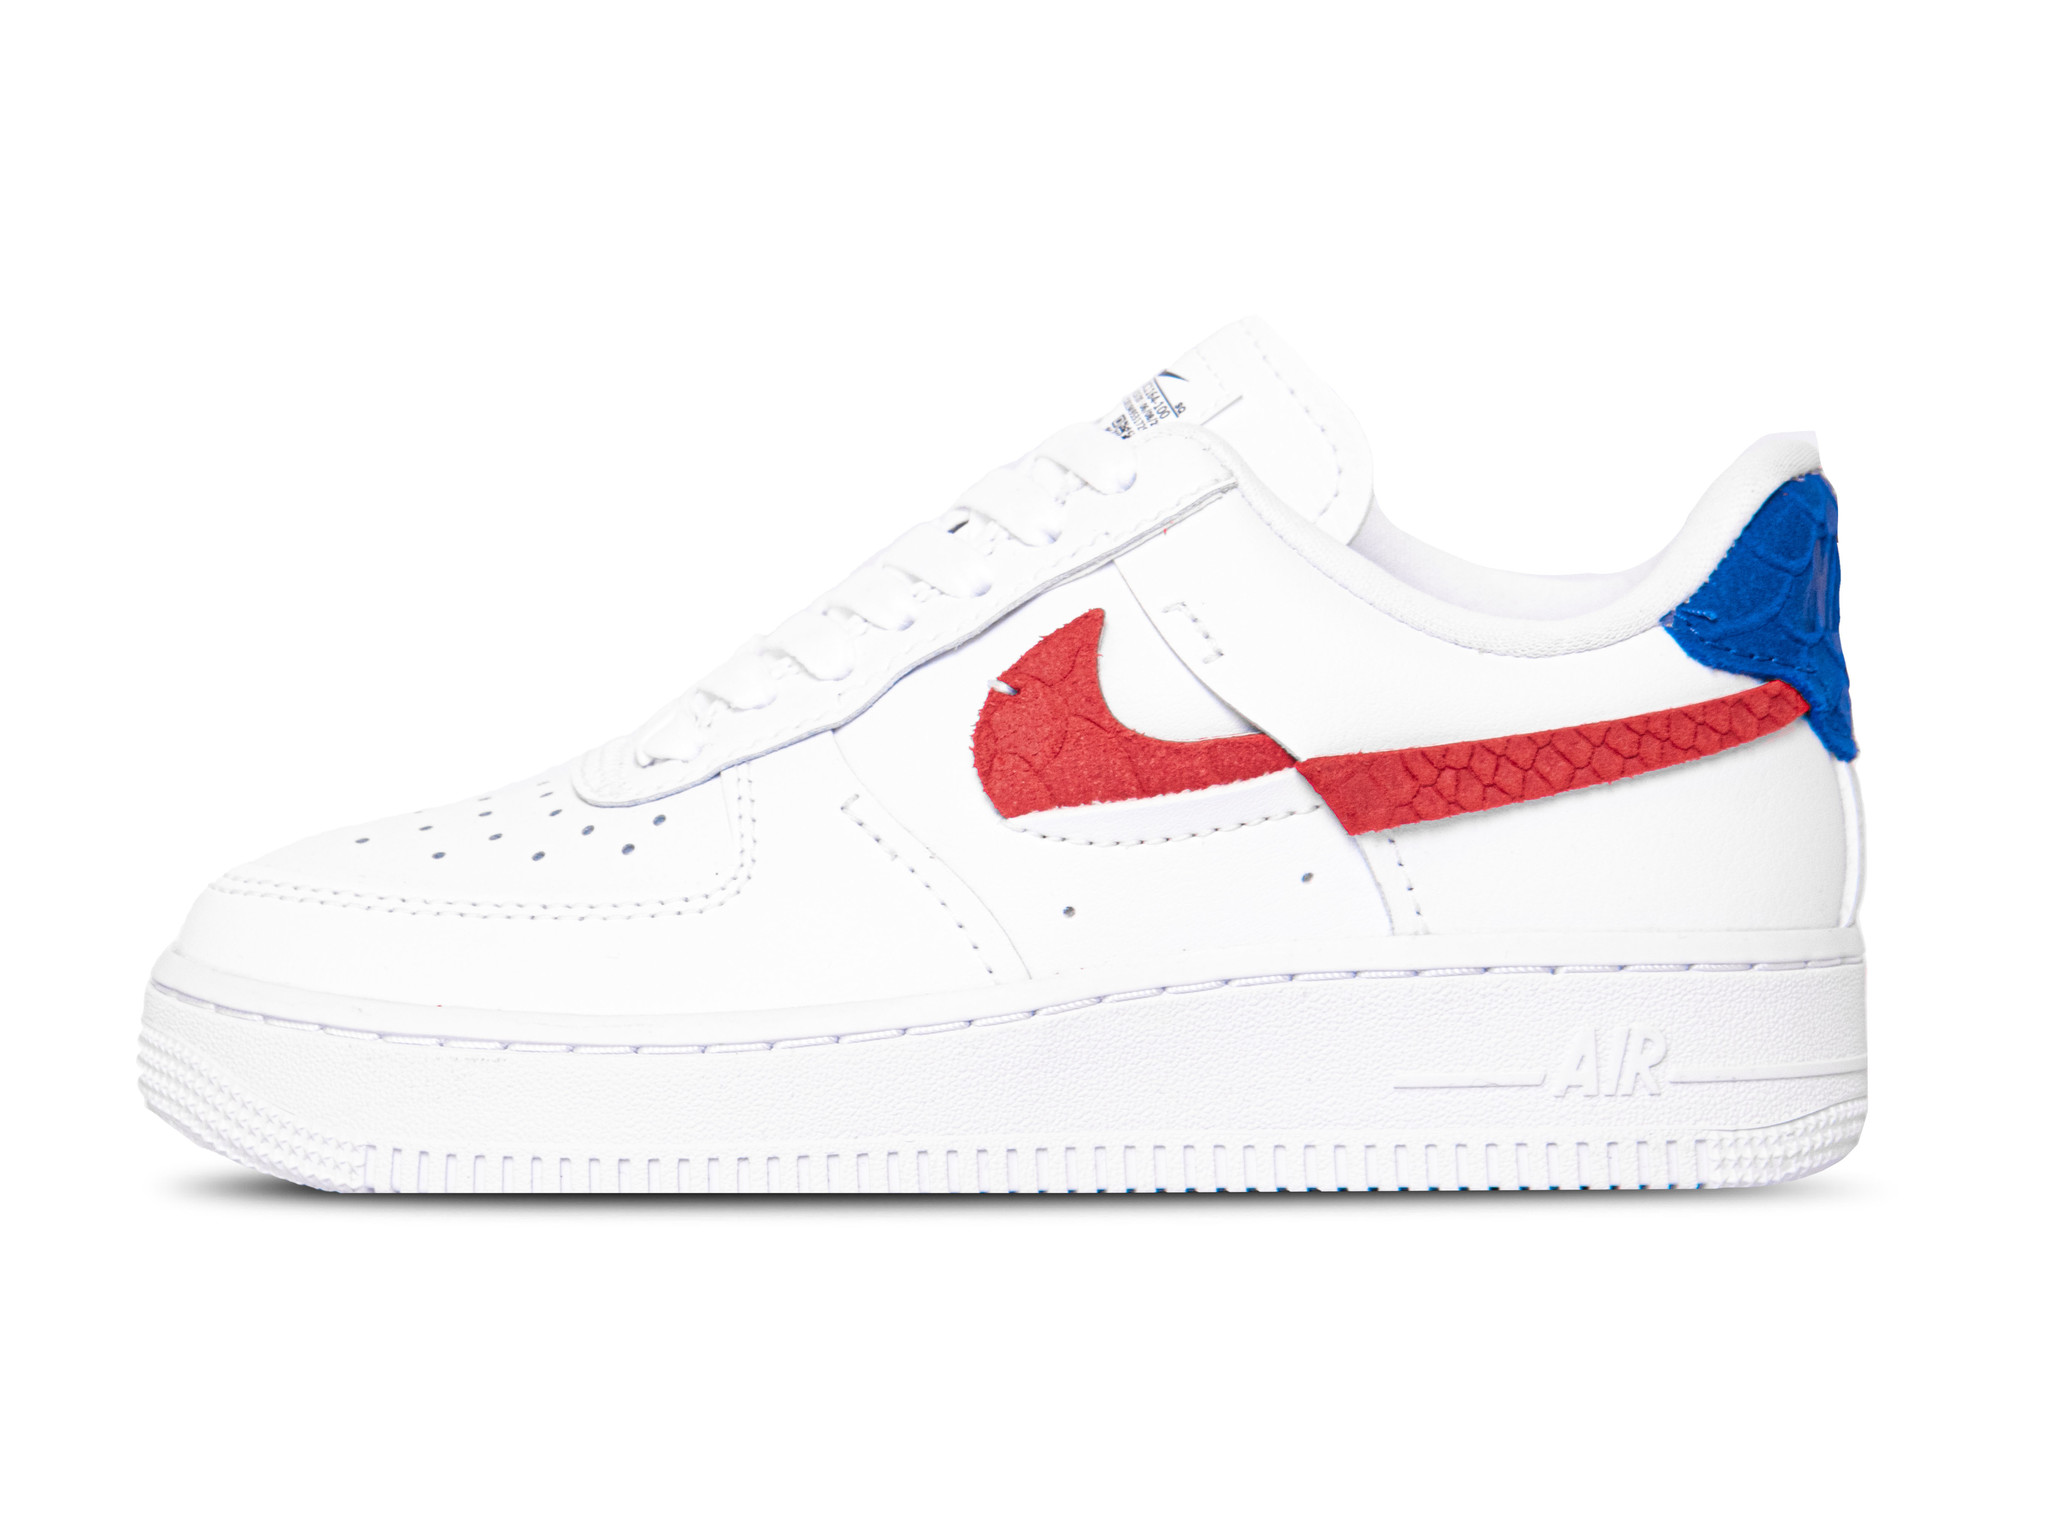 union air force 1